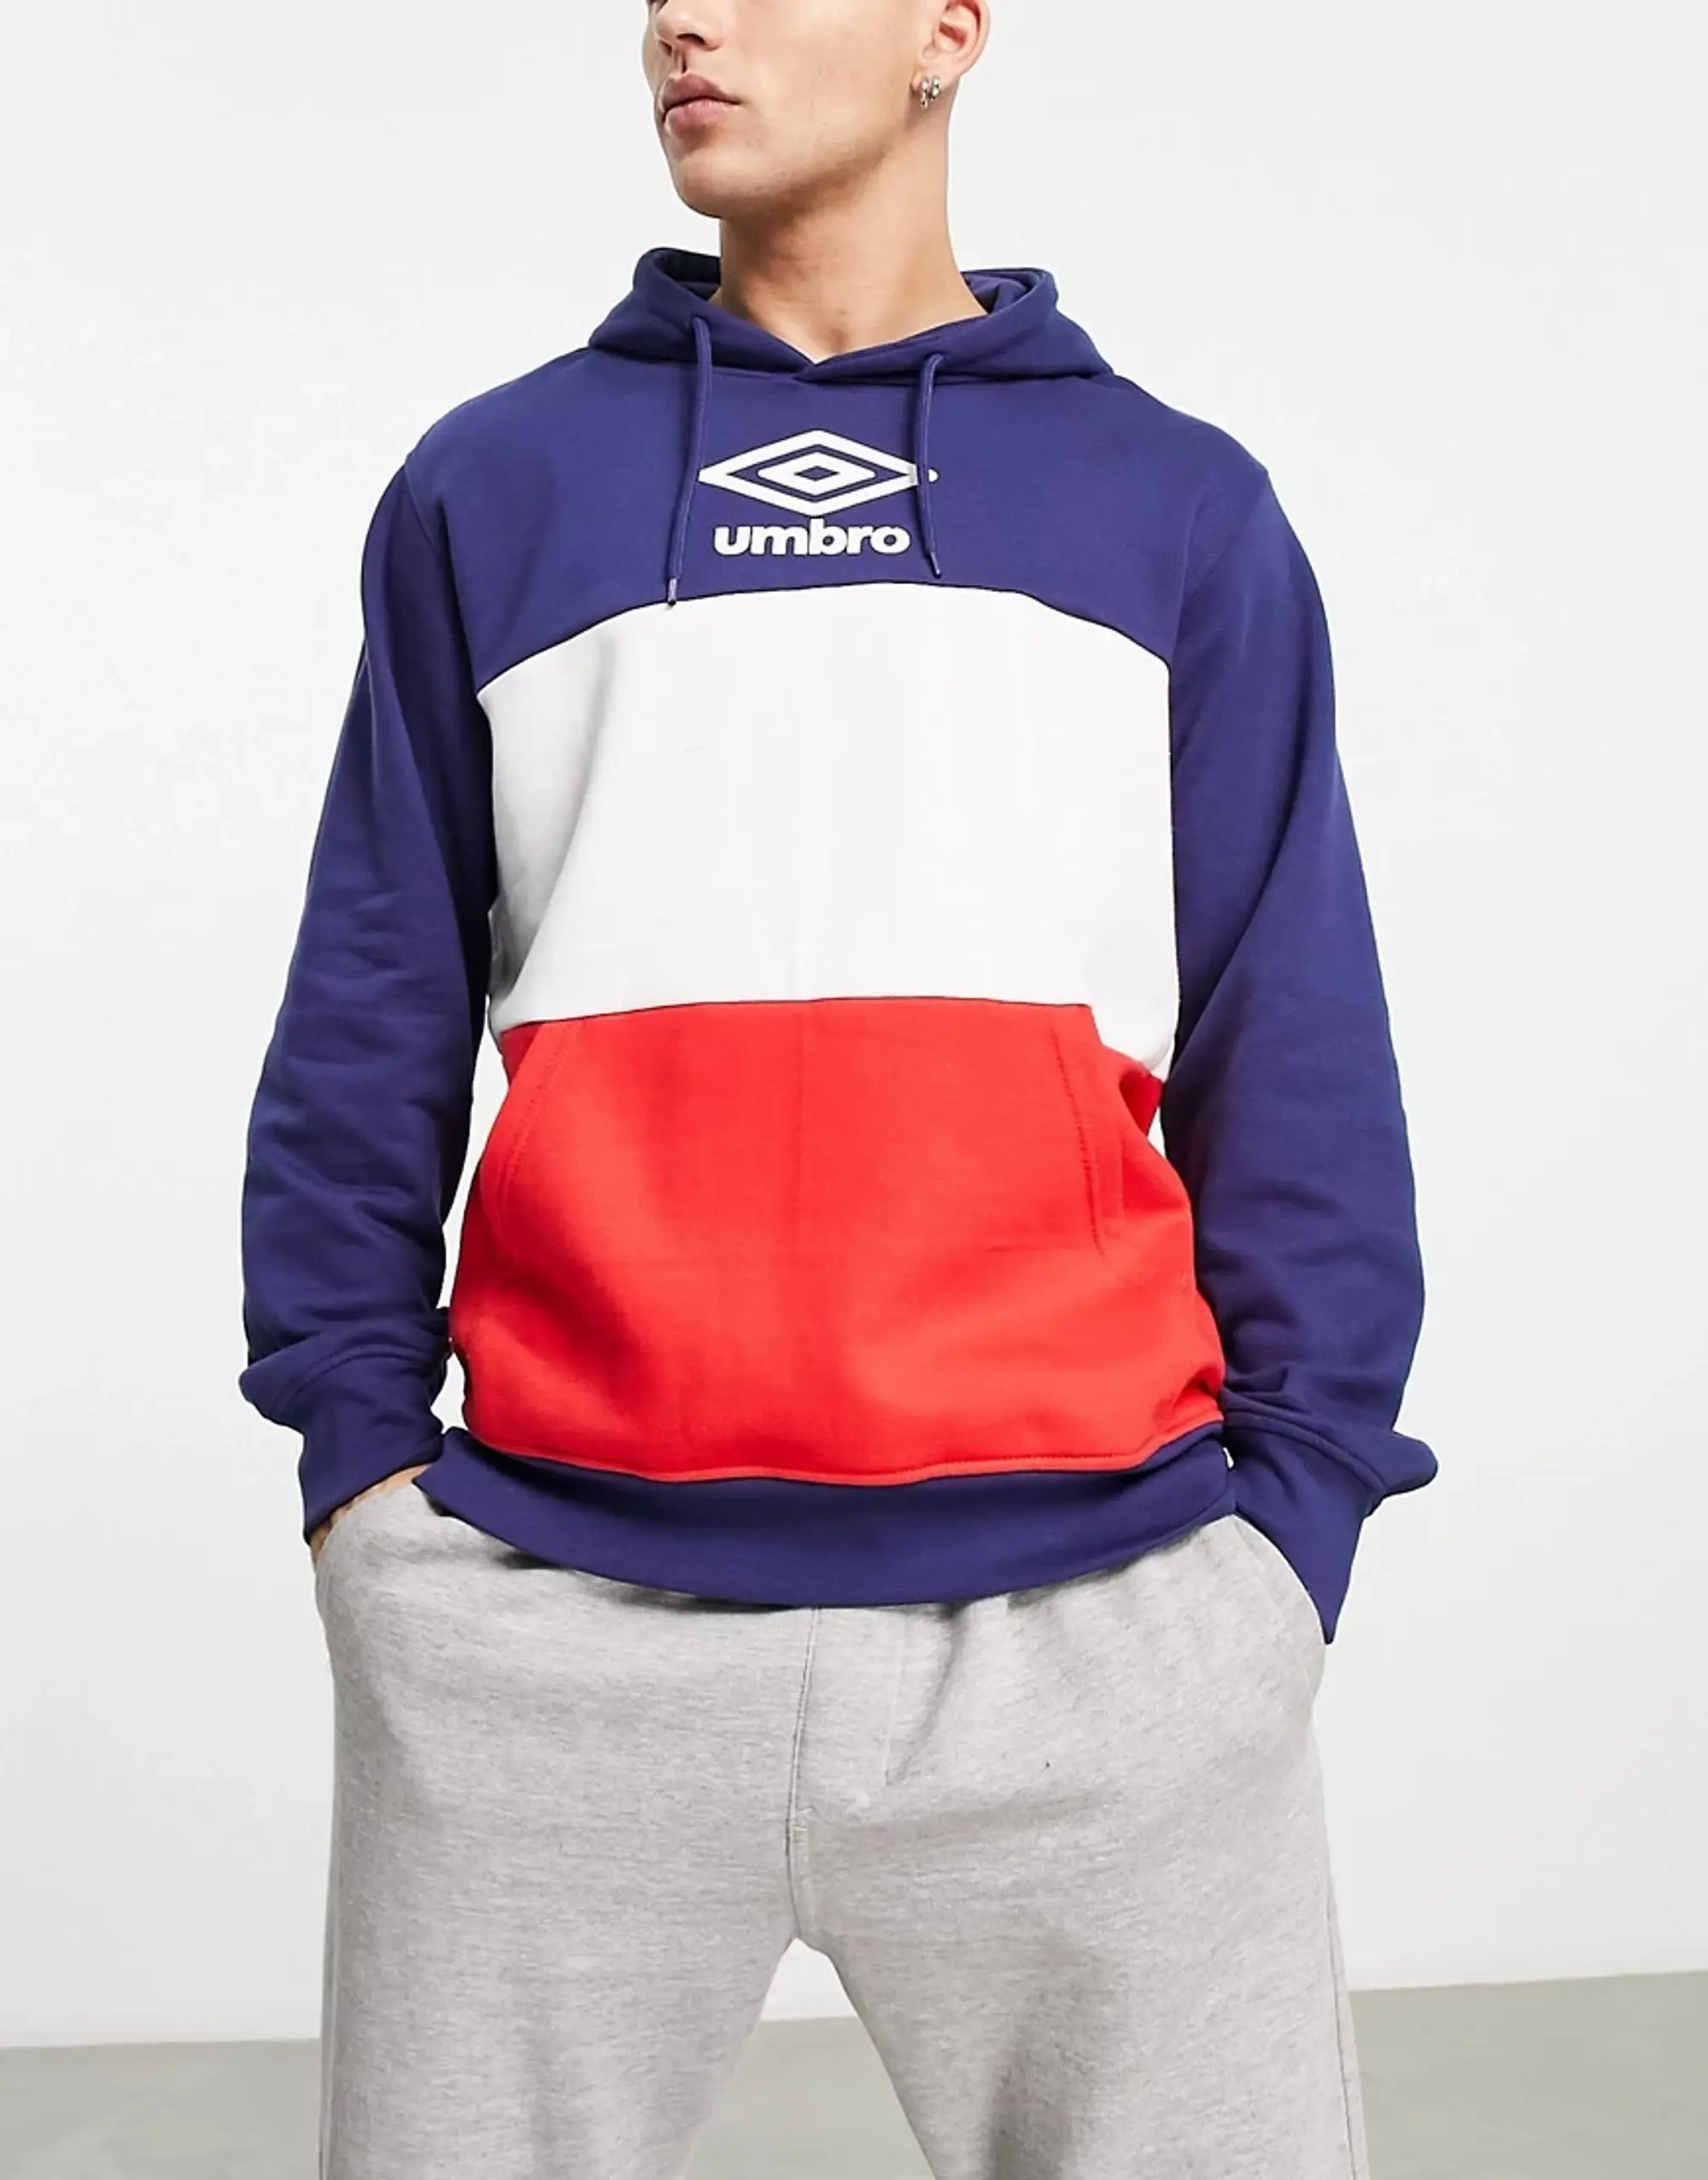 Umbro Home Turf Overhead Hoodie In Navy And Red-Multi